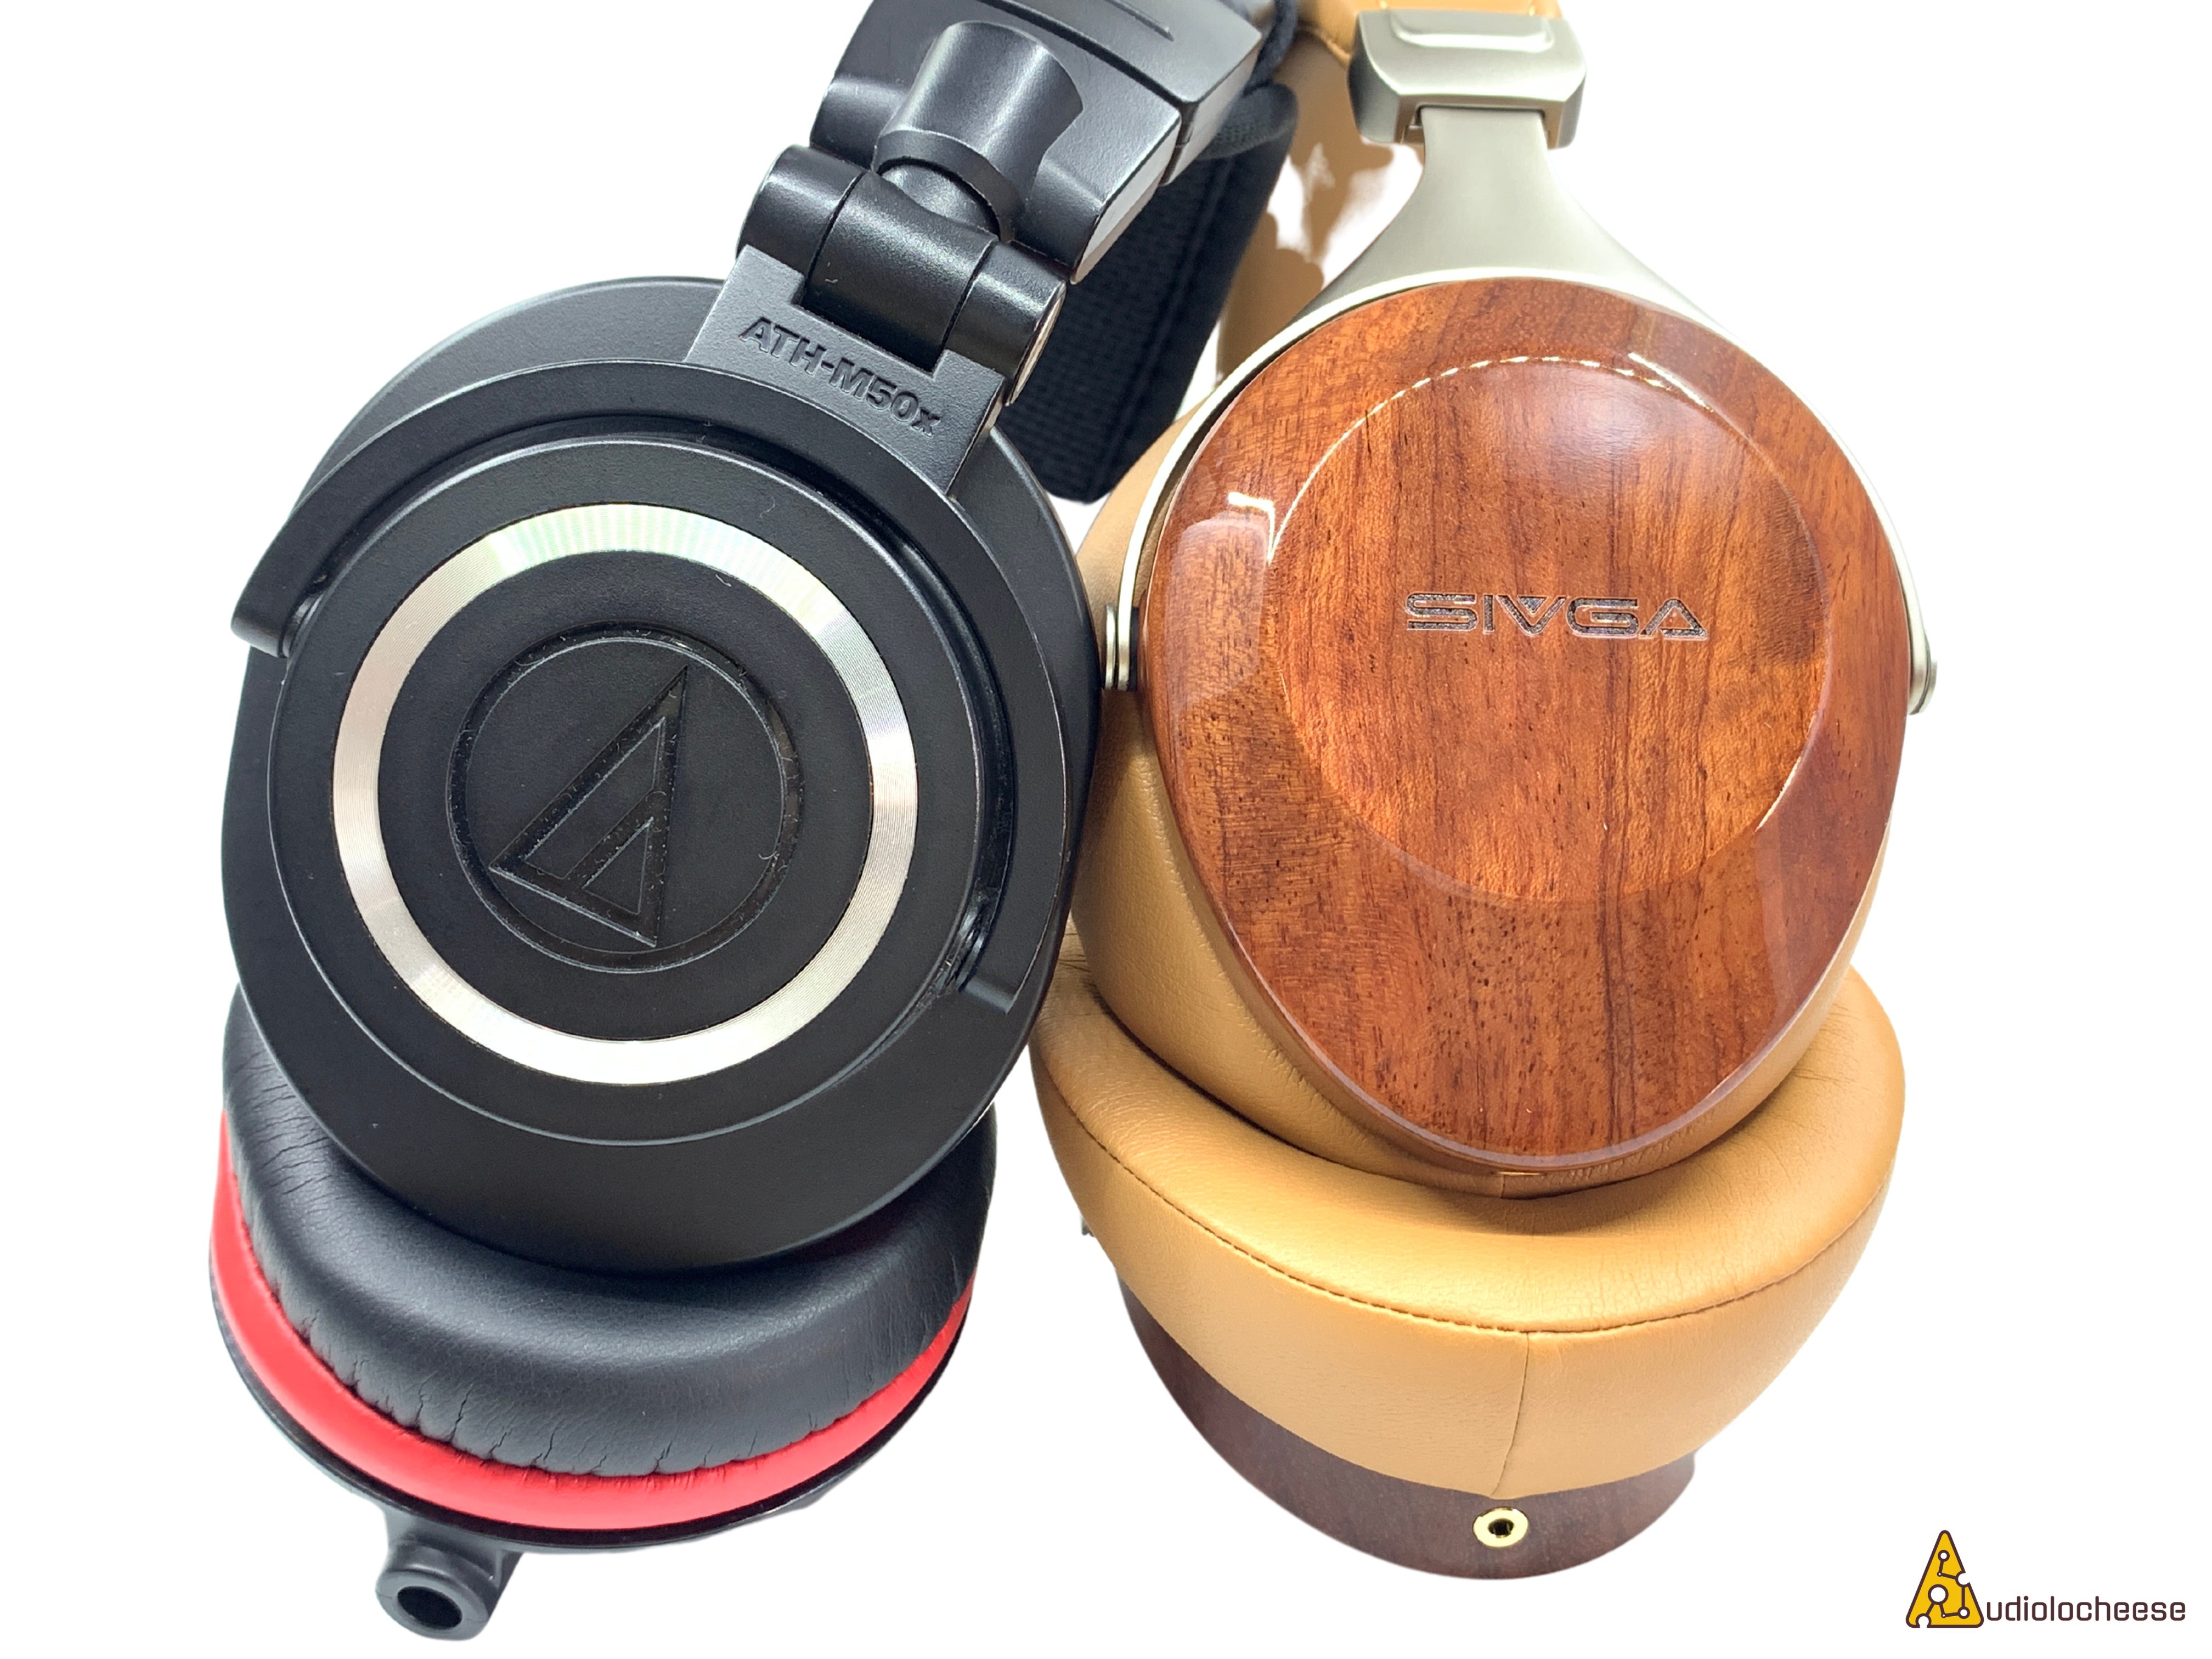 The modern and fashionable looking Robin are definitely more eye-catching for consumers than the ATH-M50X.